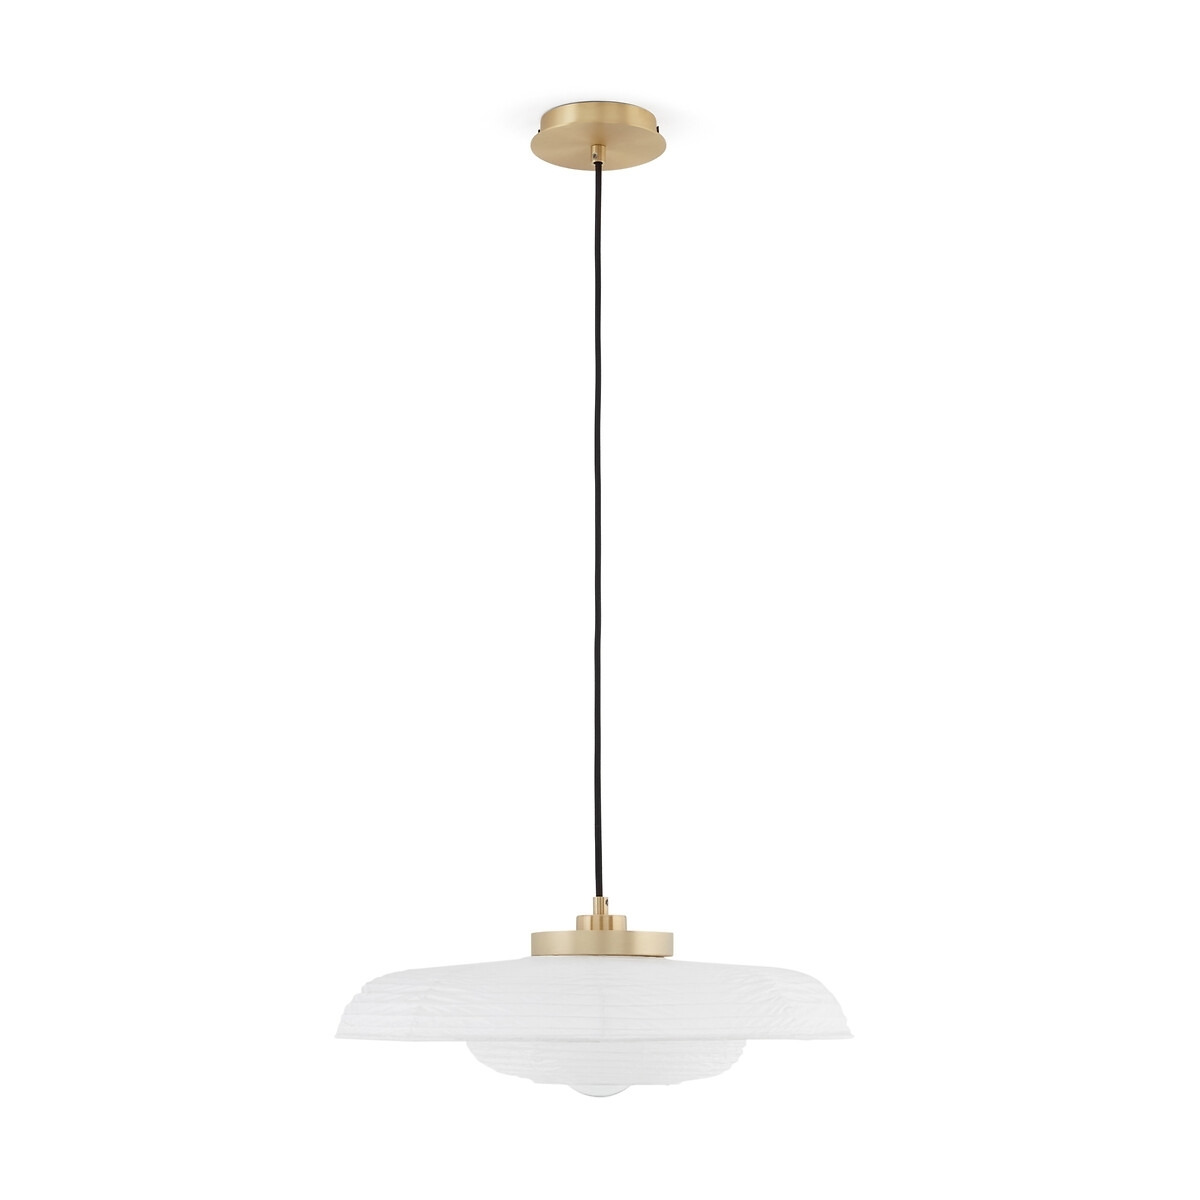 Tuuno Paper and Metal Double Ceiling Light - image 1